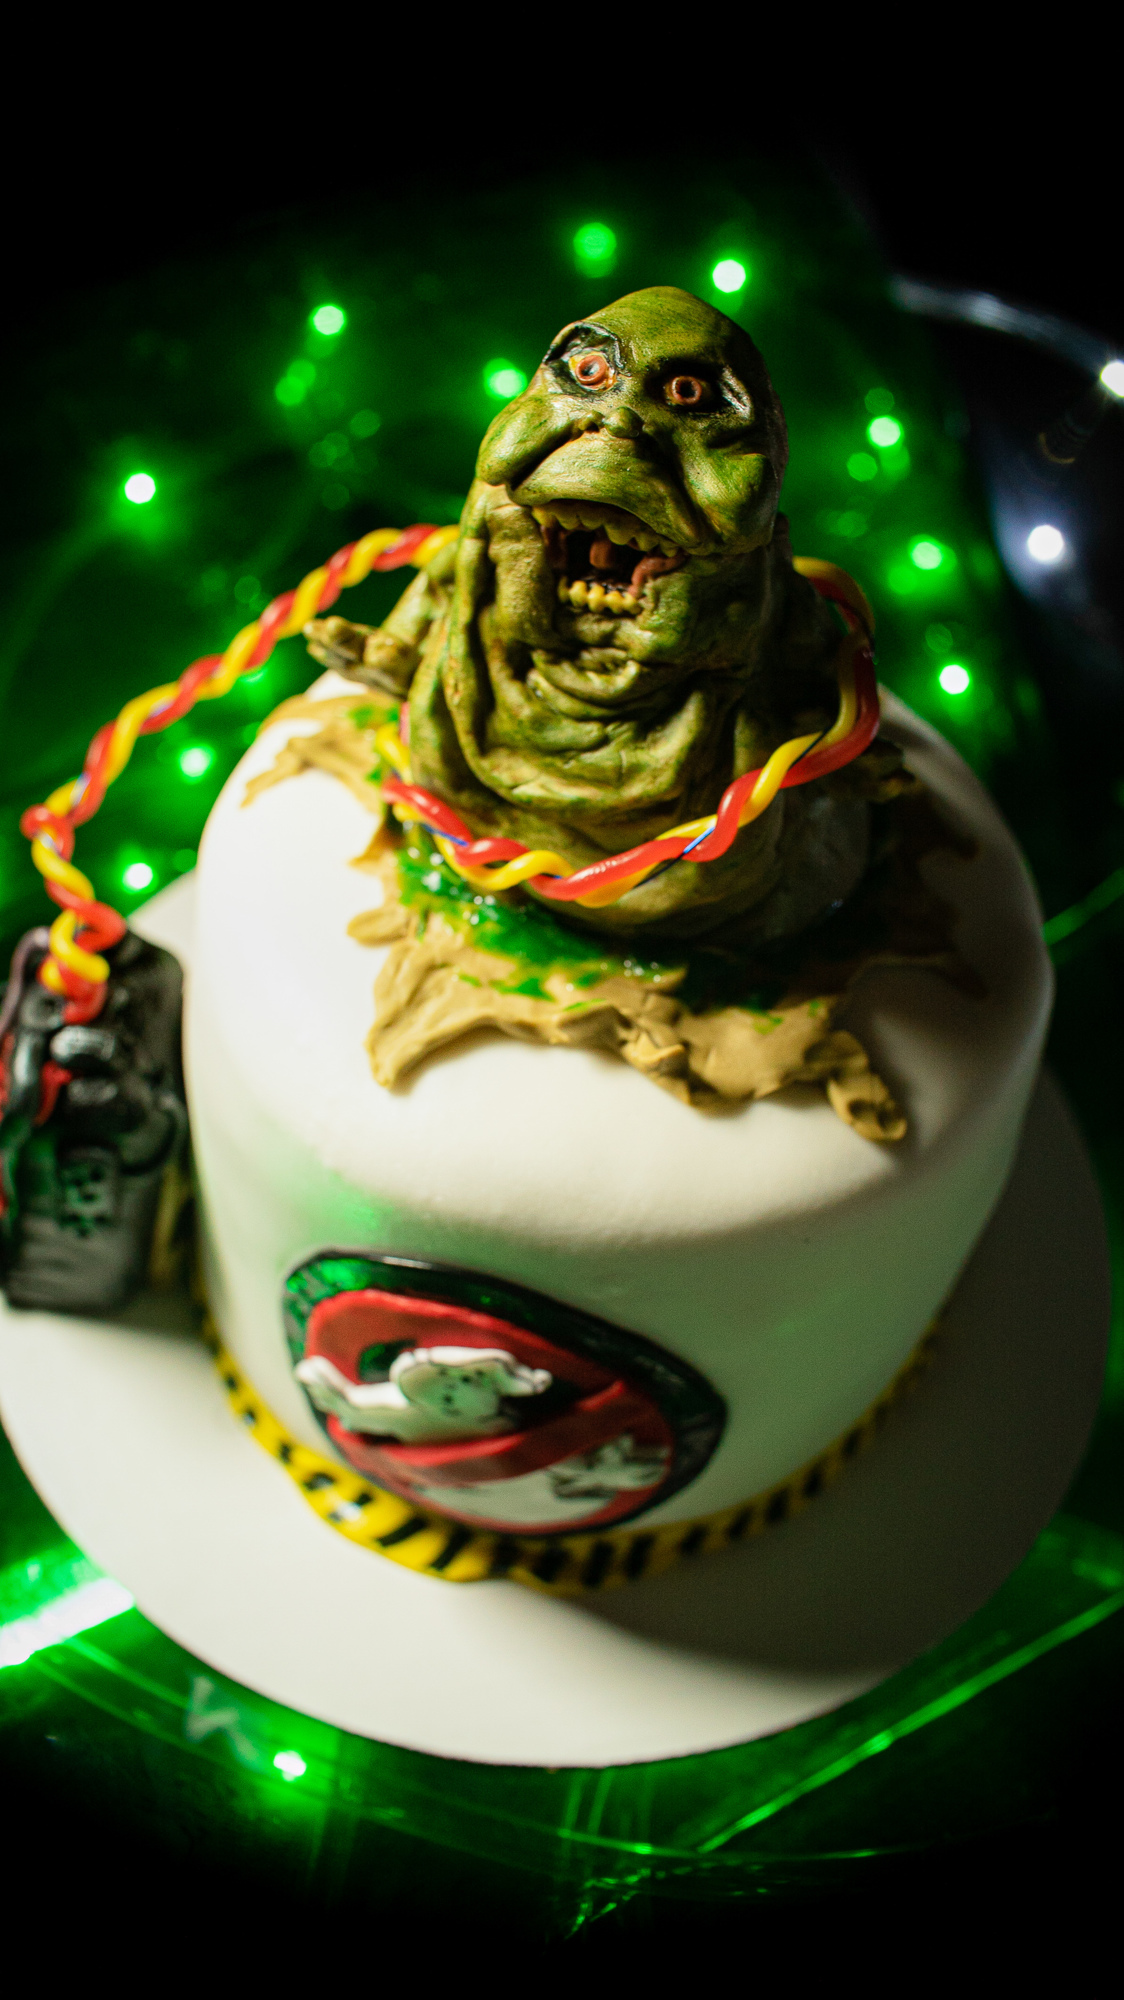 This Ghostbusters themed cake was one of Cline’s favorite creations. (Courtesy Erin Cline)